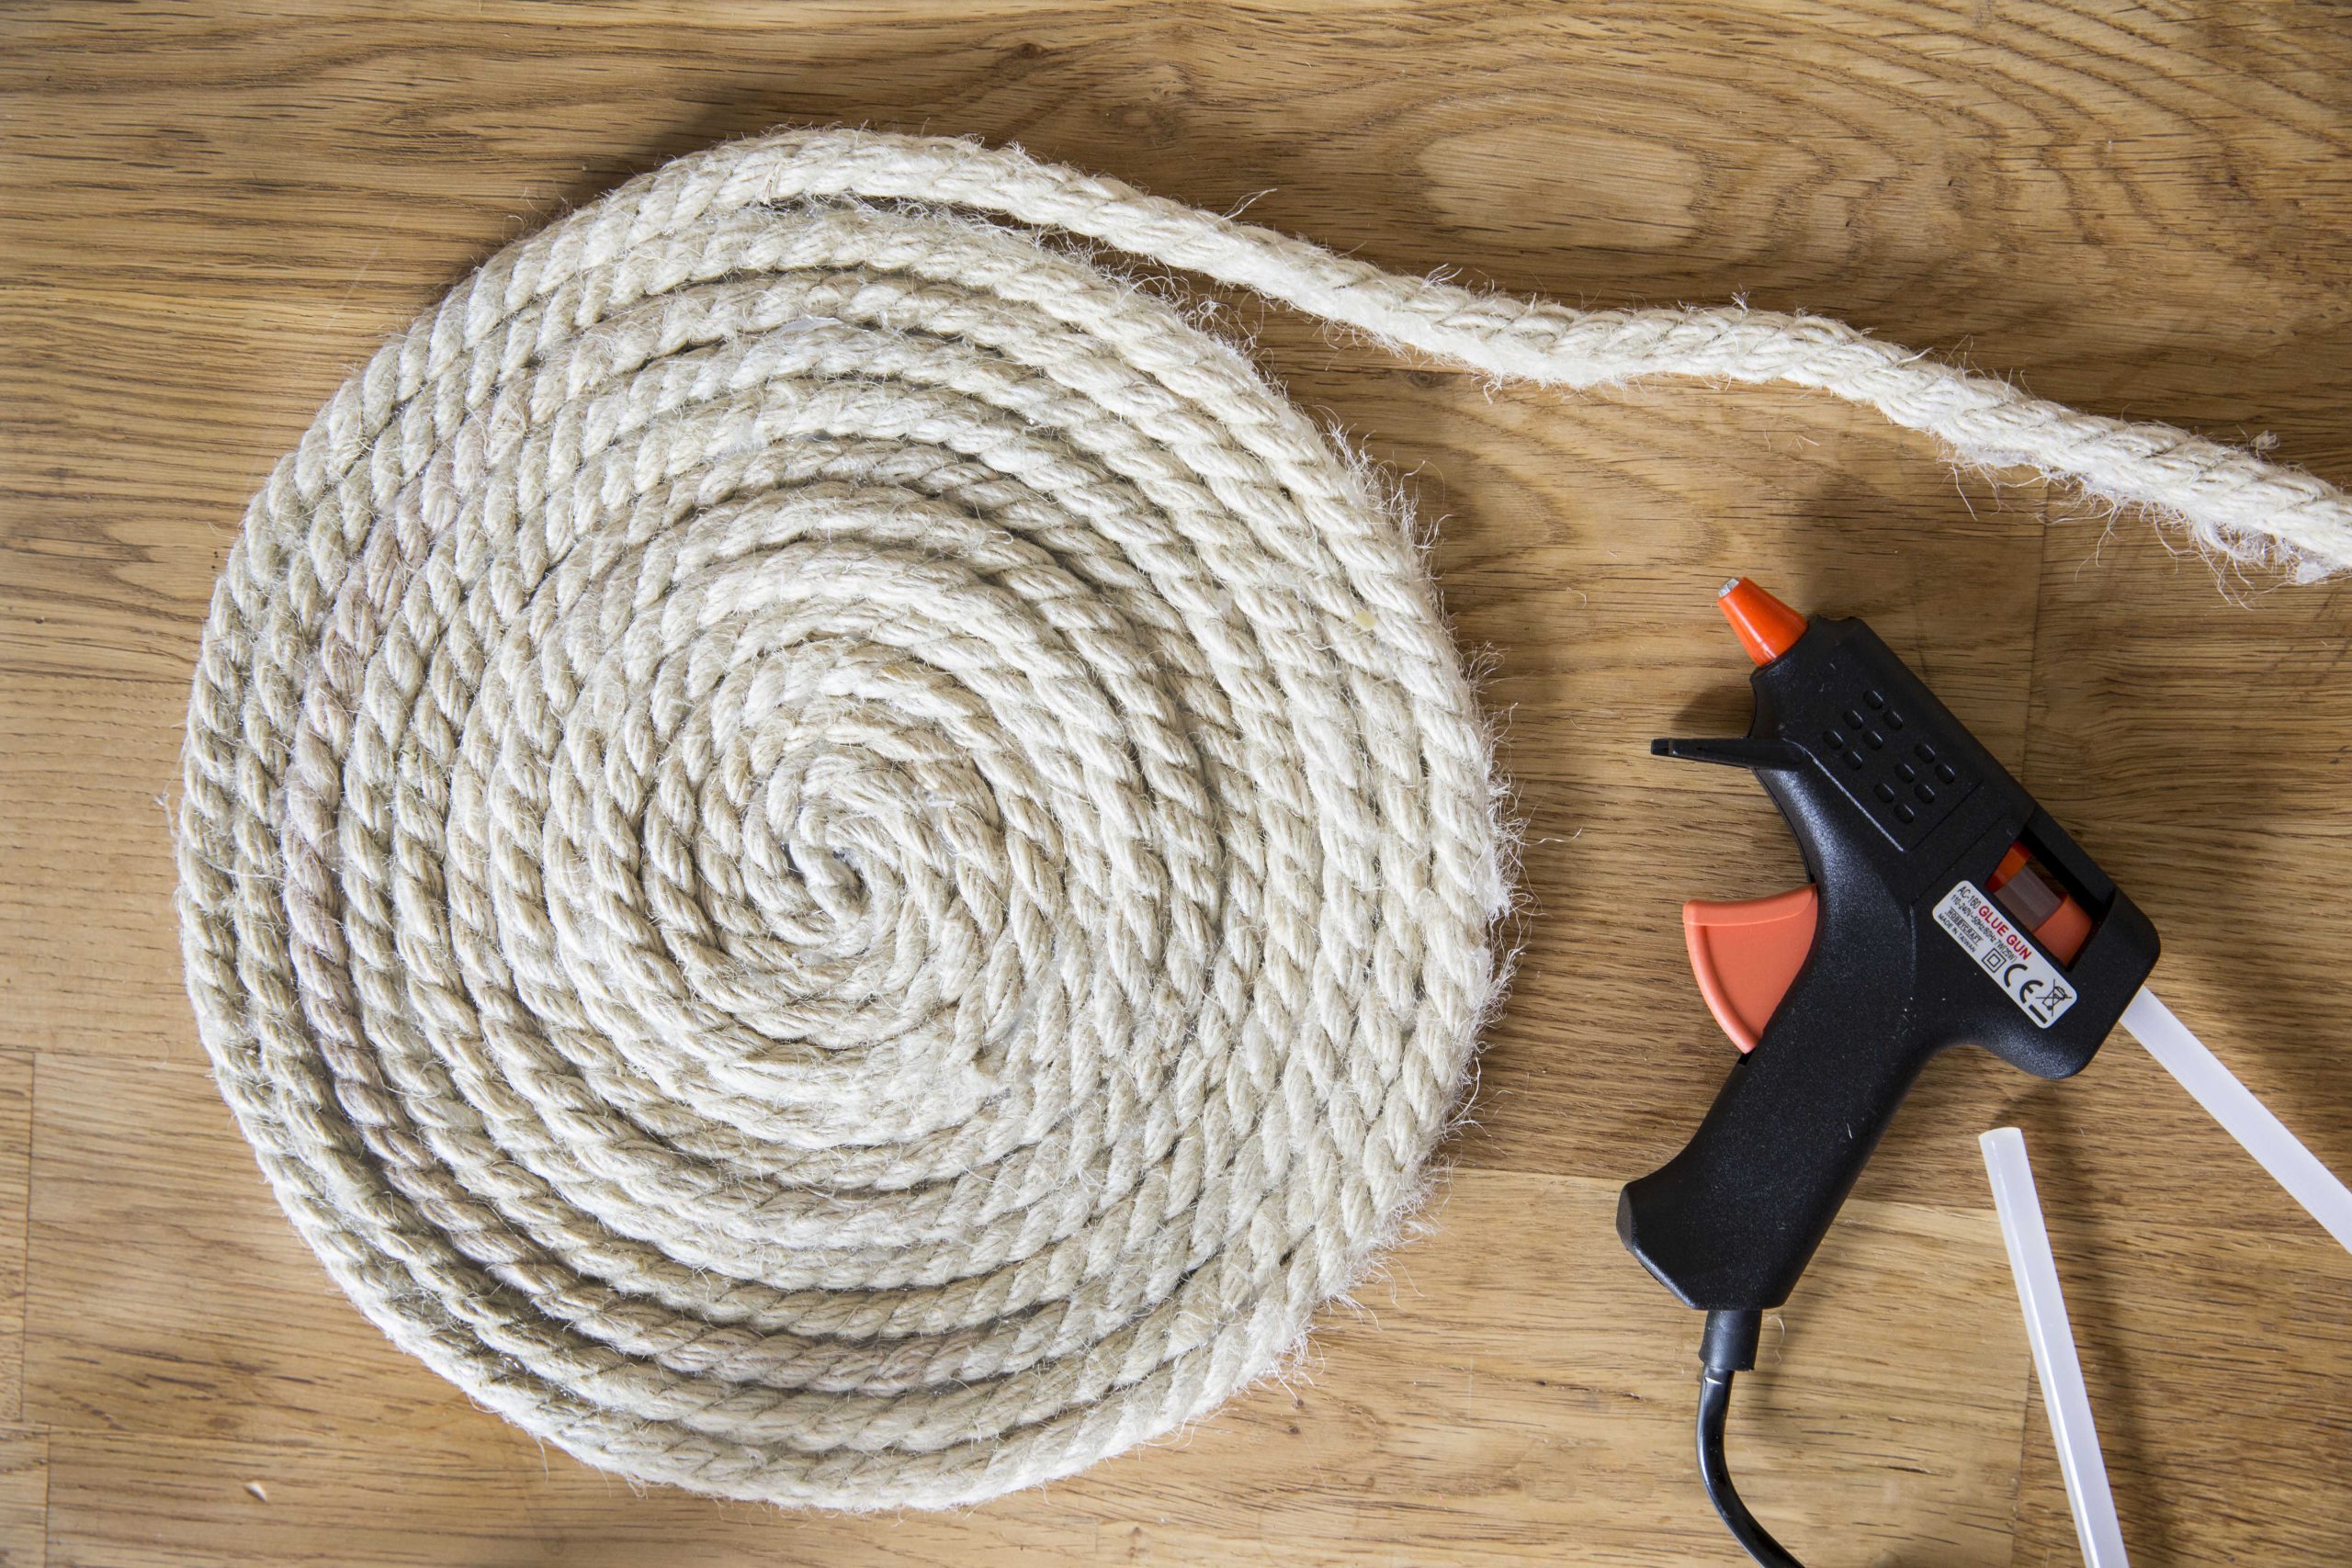 Make your own coiled rope basket - Coast Magazine